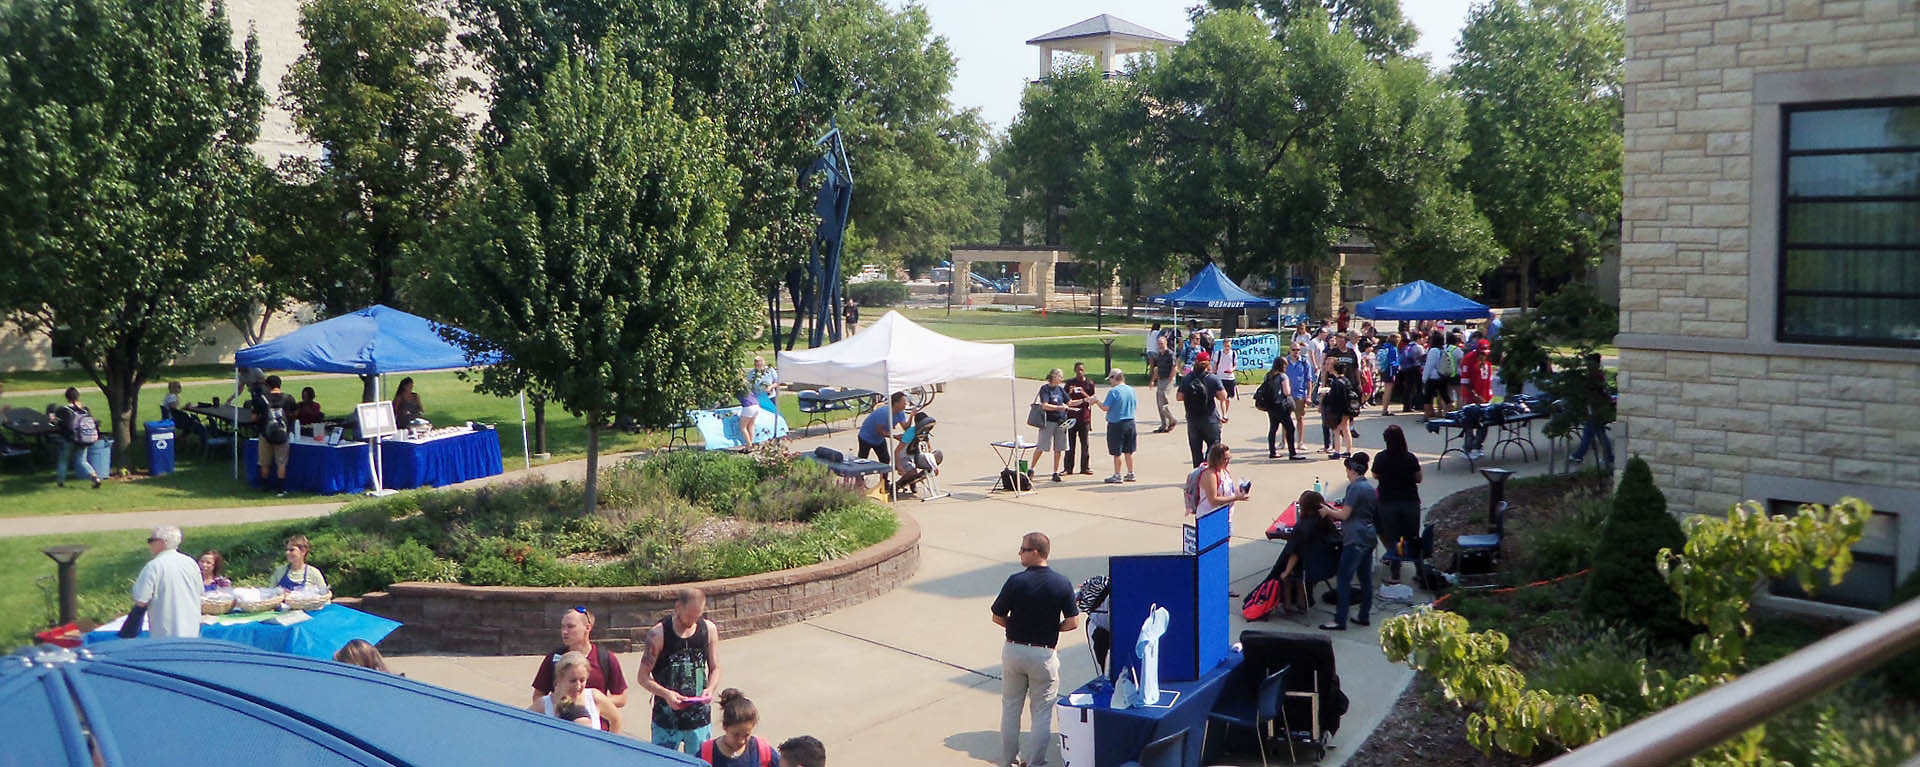 Vendor booths and students surround the union for Market Daze